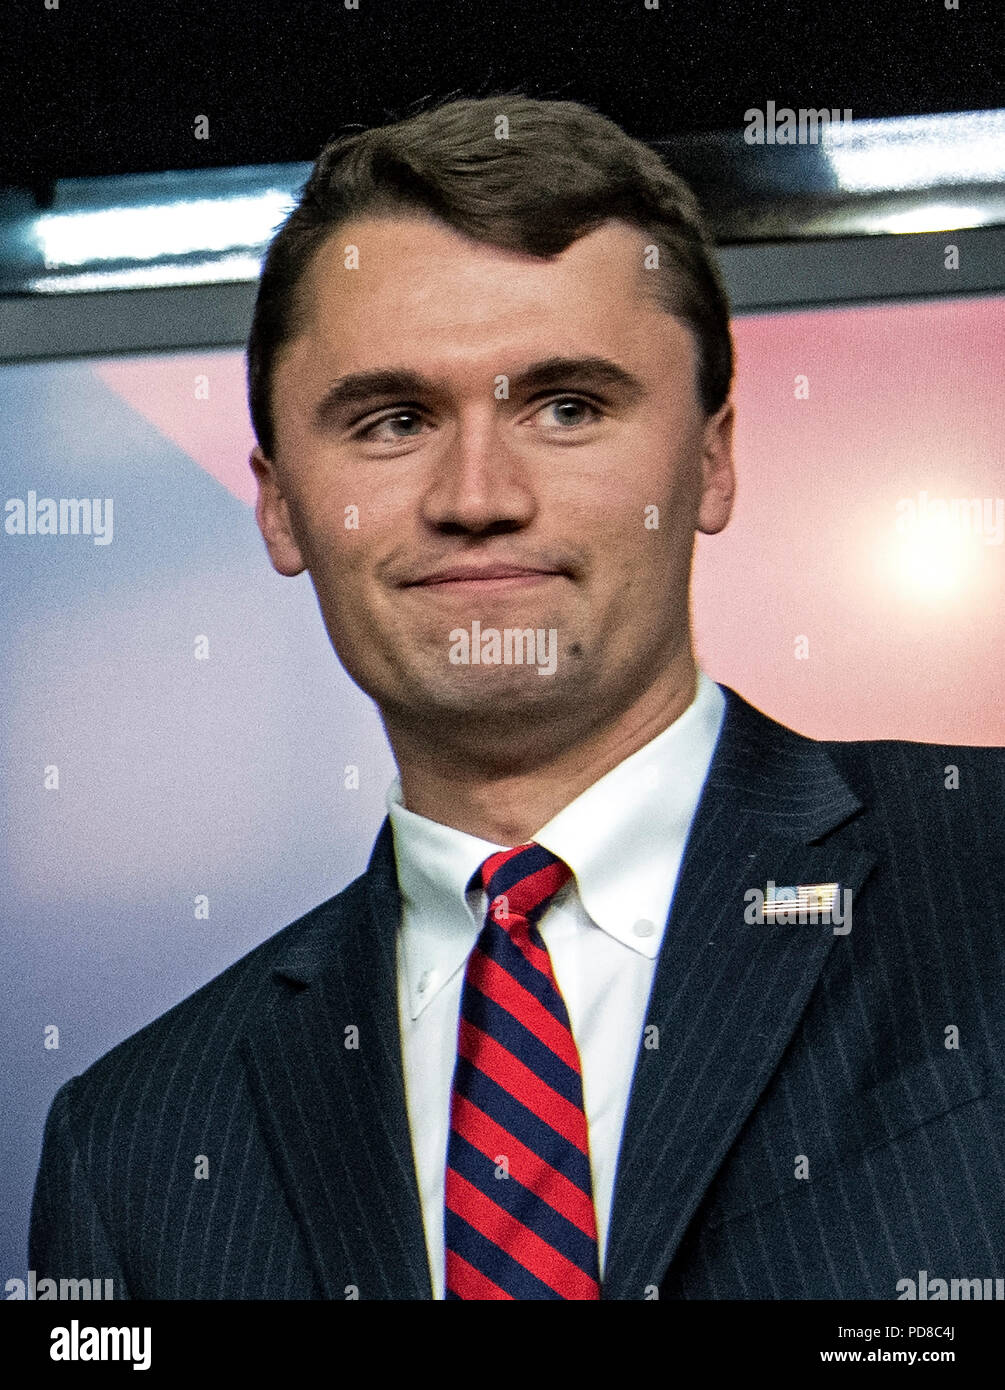 Washington, United States Of America. 22nd Mar, 2018. Charlie Kirk, Founder and Executive Director of Turning Point USA, after interviewing United States President Donald J. Trump at the Generation Next Summit at the White House in Washington, DC on Thursday, March 22, 2018. Credit: Ron Sachs/CNP | usage worldwide Credit: dpa/Alamy Live News Stock Photo